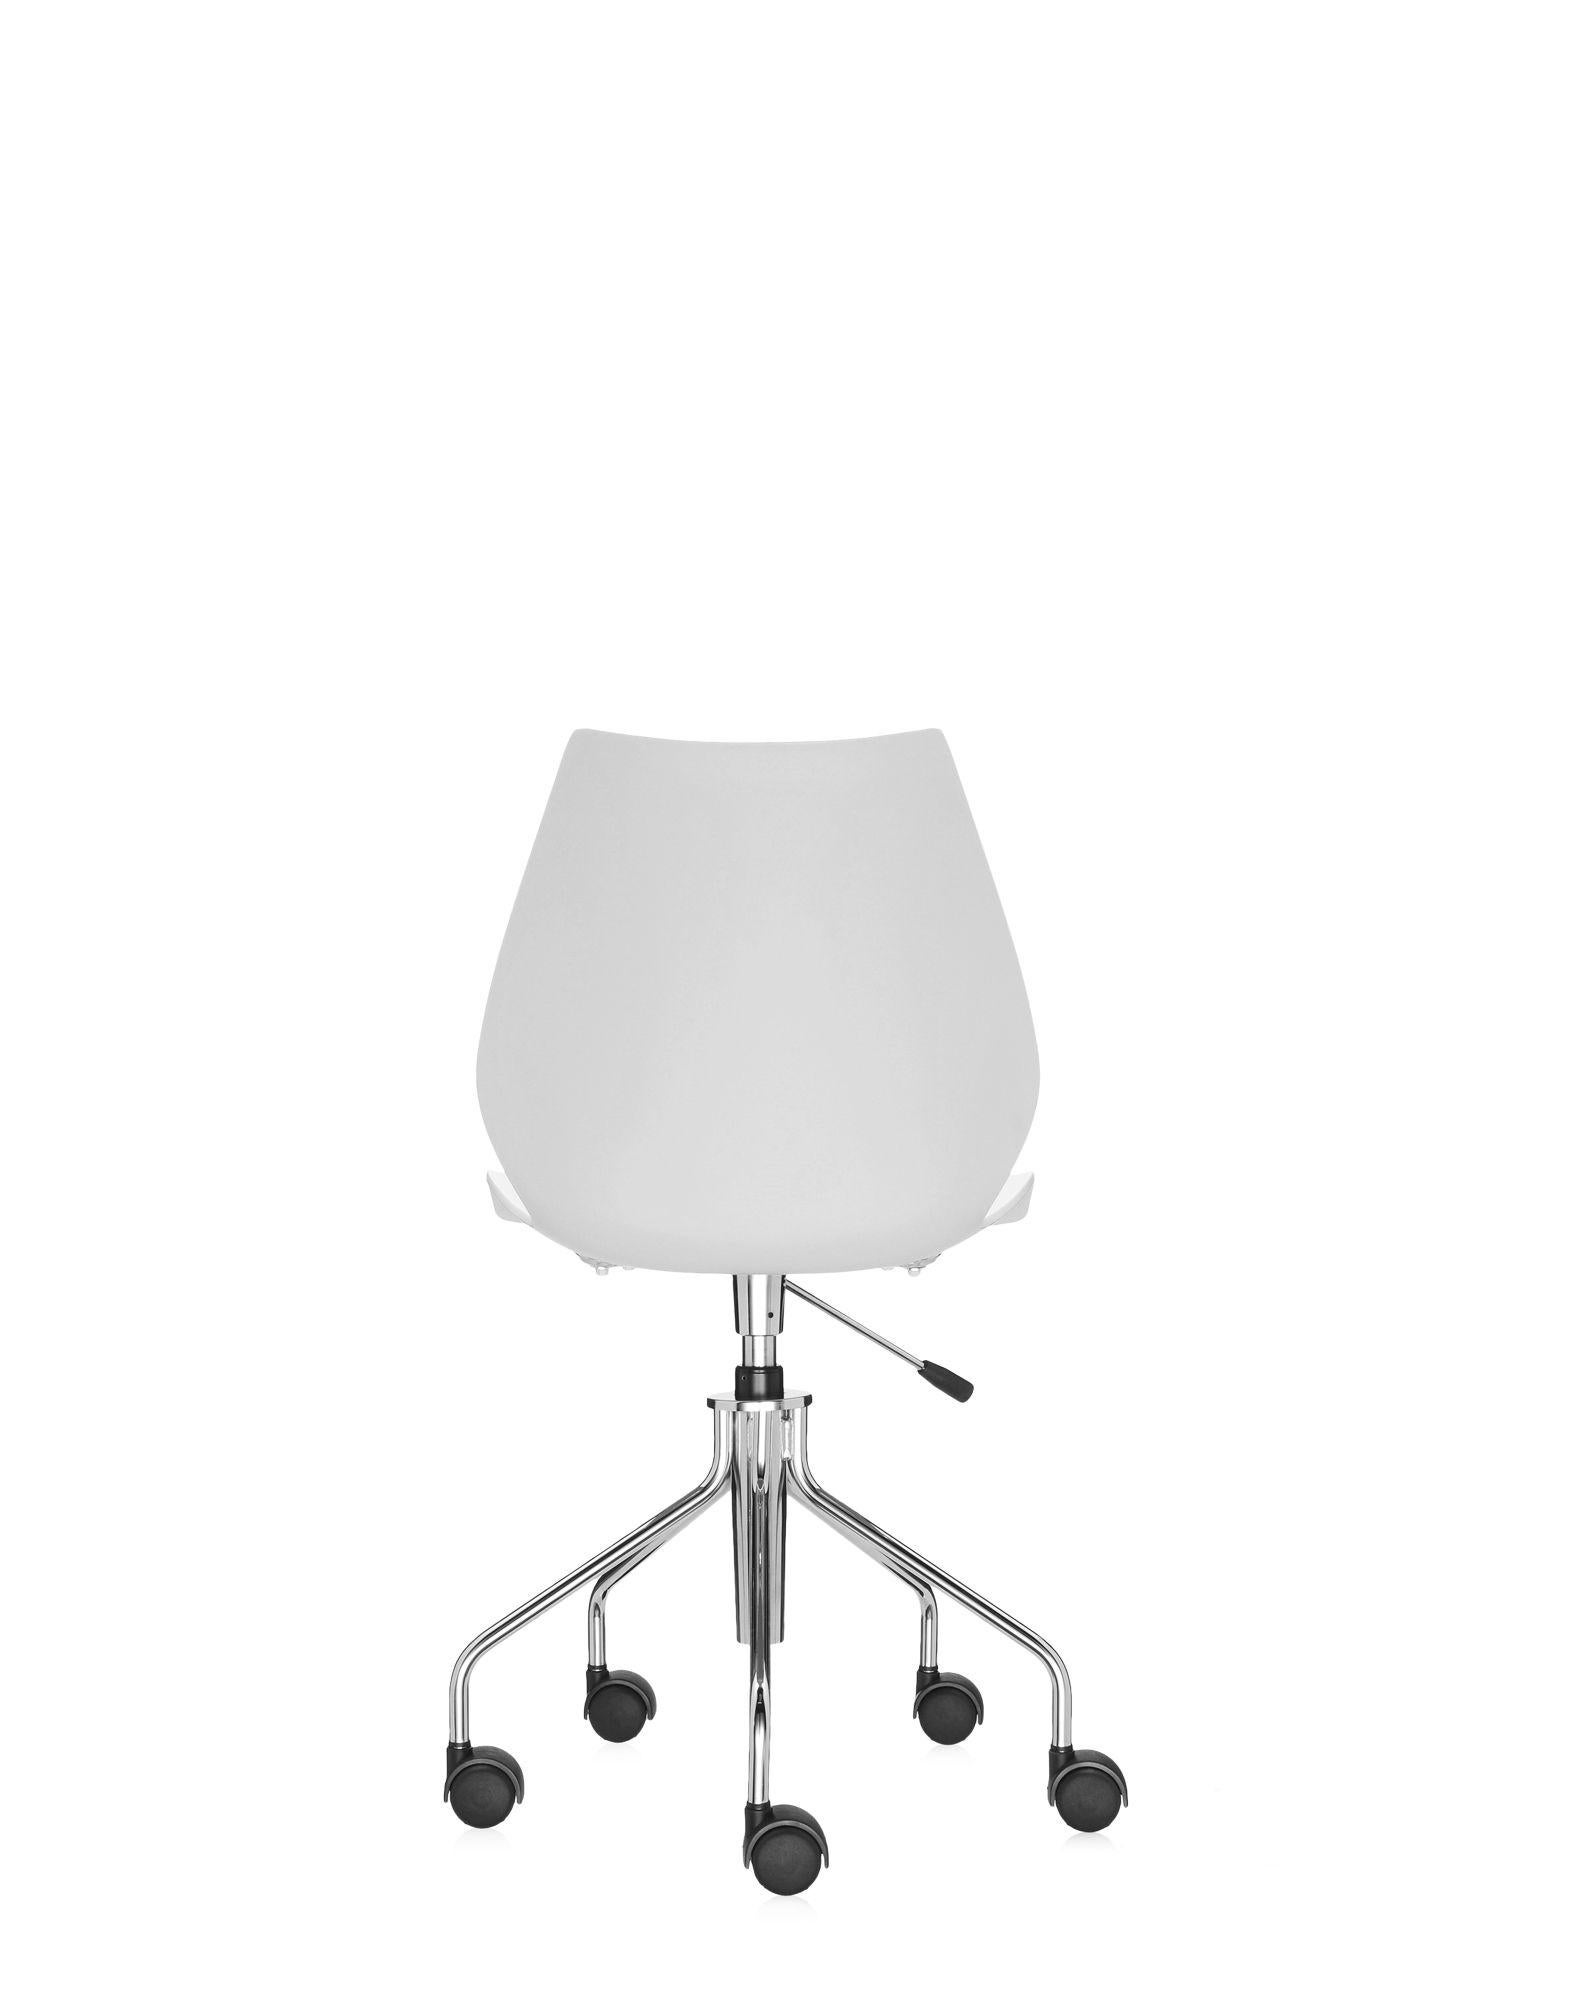 Plastic Kartell Maui Swivel Chair Adjustable in Zinc White by Vico Magistretti